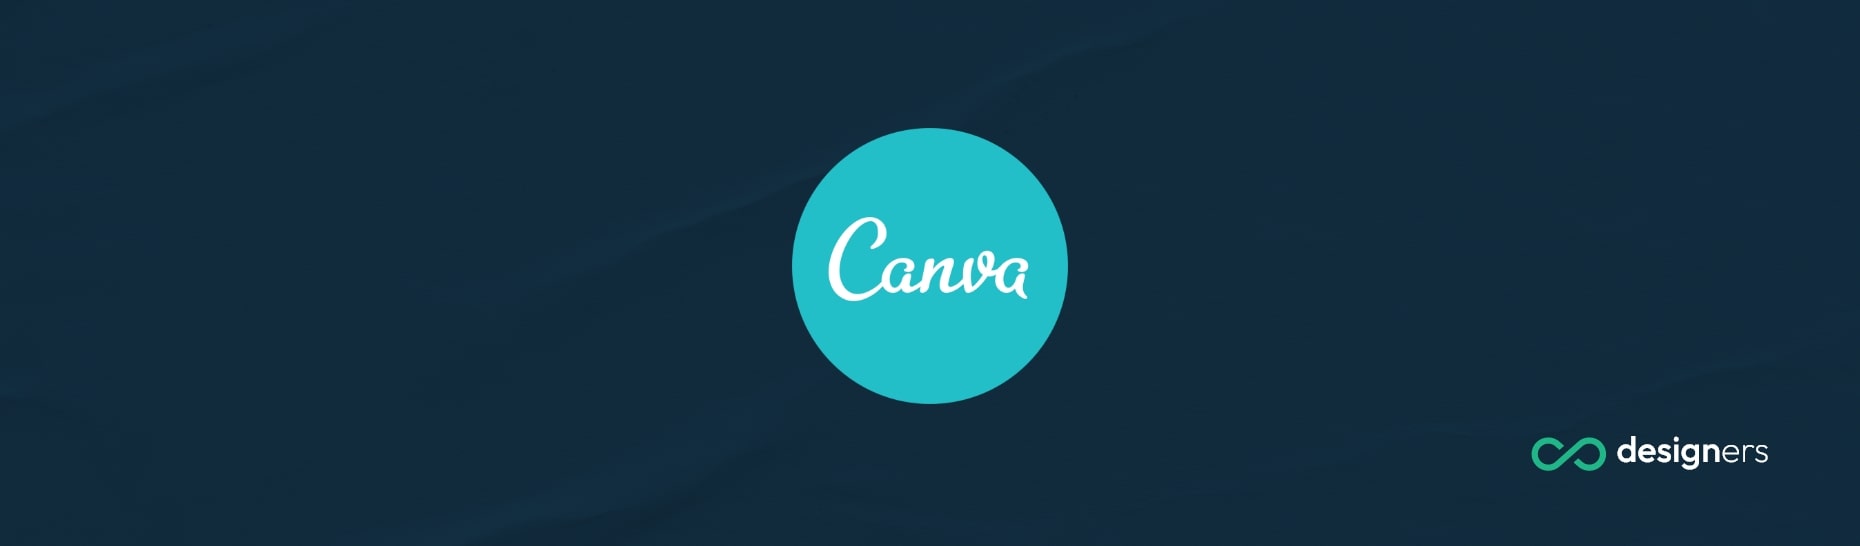 Is Canva Good for Blogging?